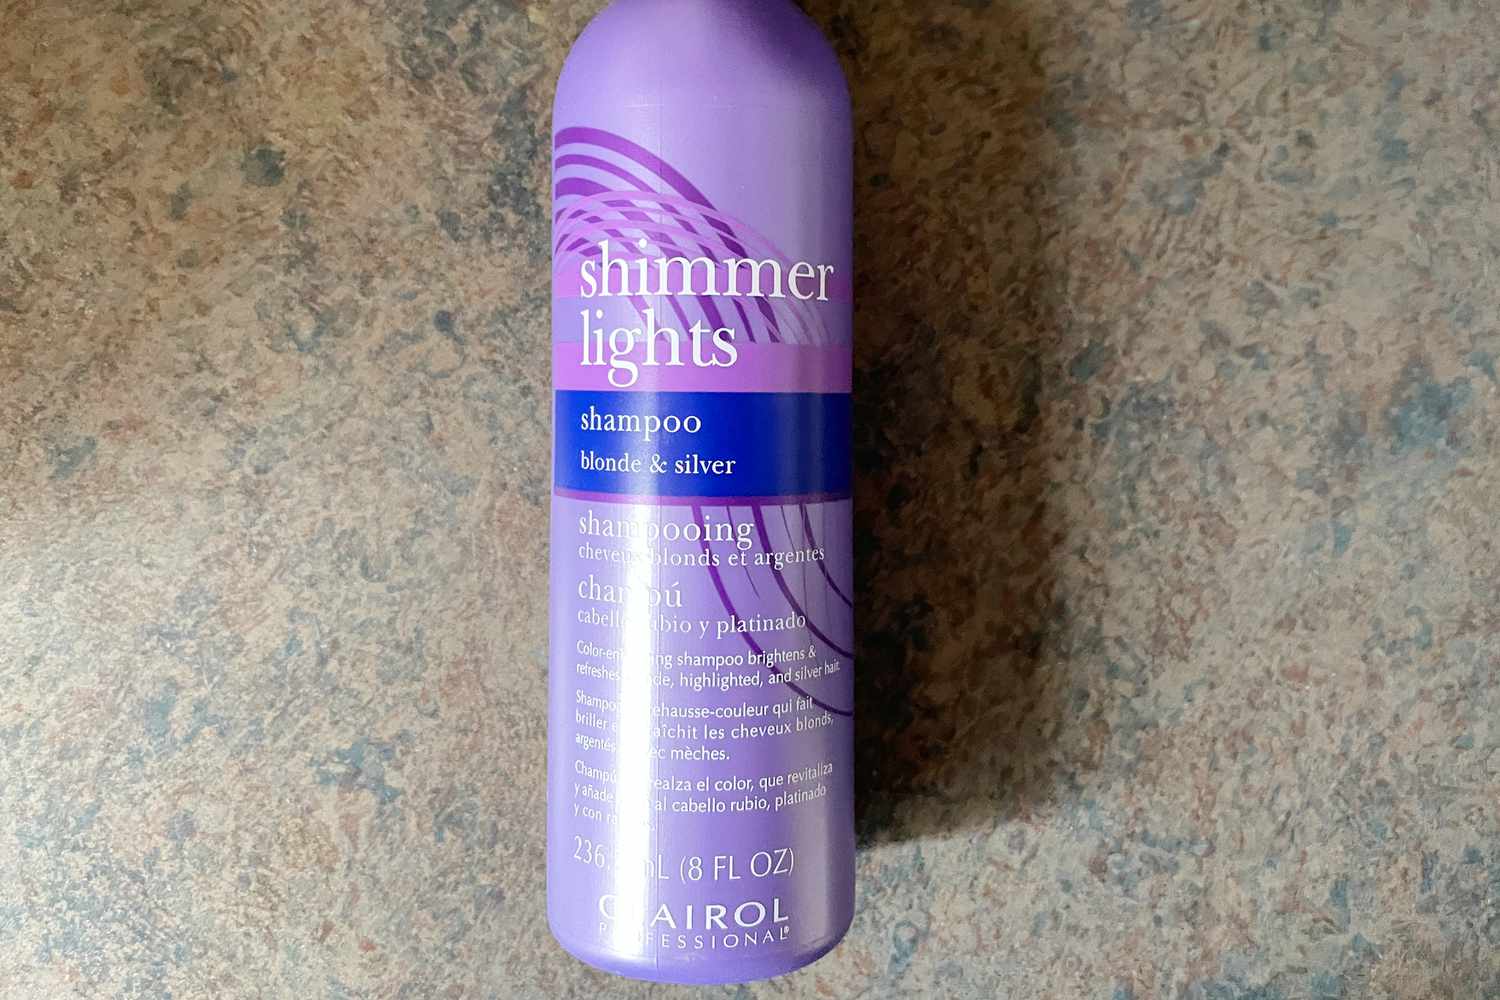 A bottle of Clairol Professional Shimmer Lights Purple Shampoo